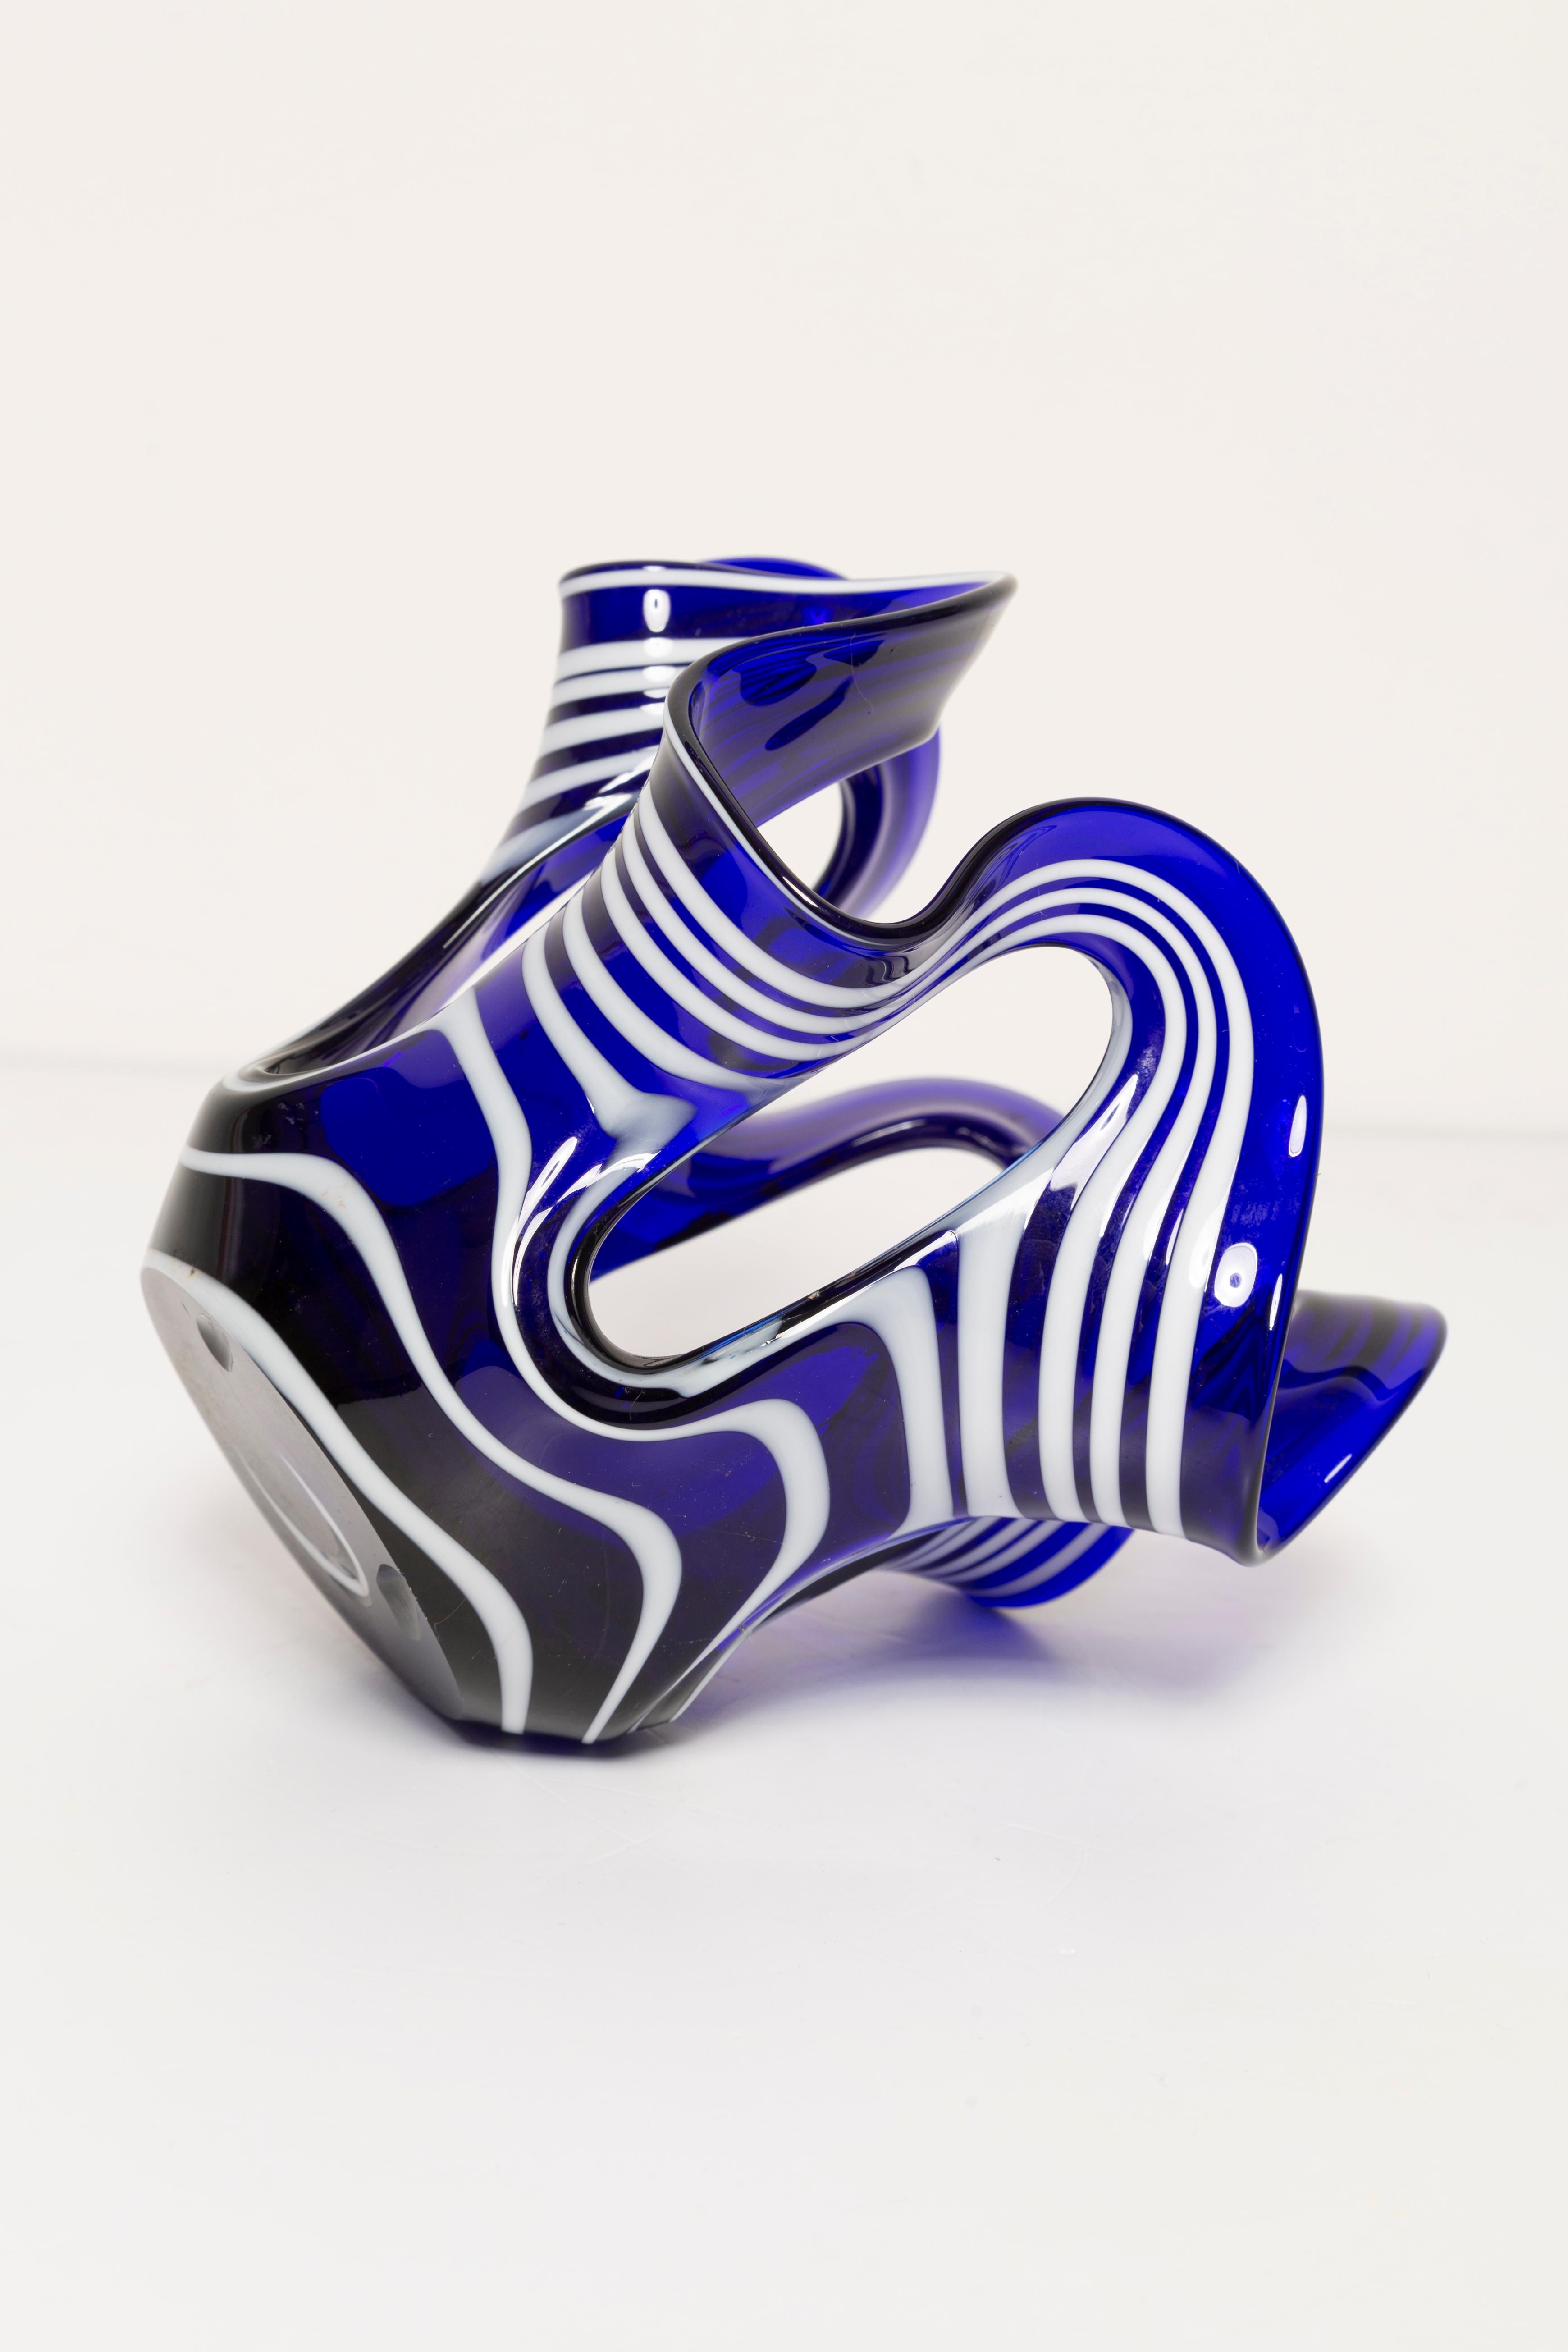 Small Mid-Century Ultramarine Blue and White Vase, Europe, 1960s For Sale 3